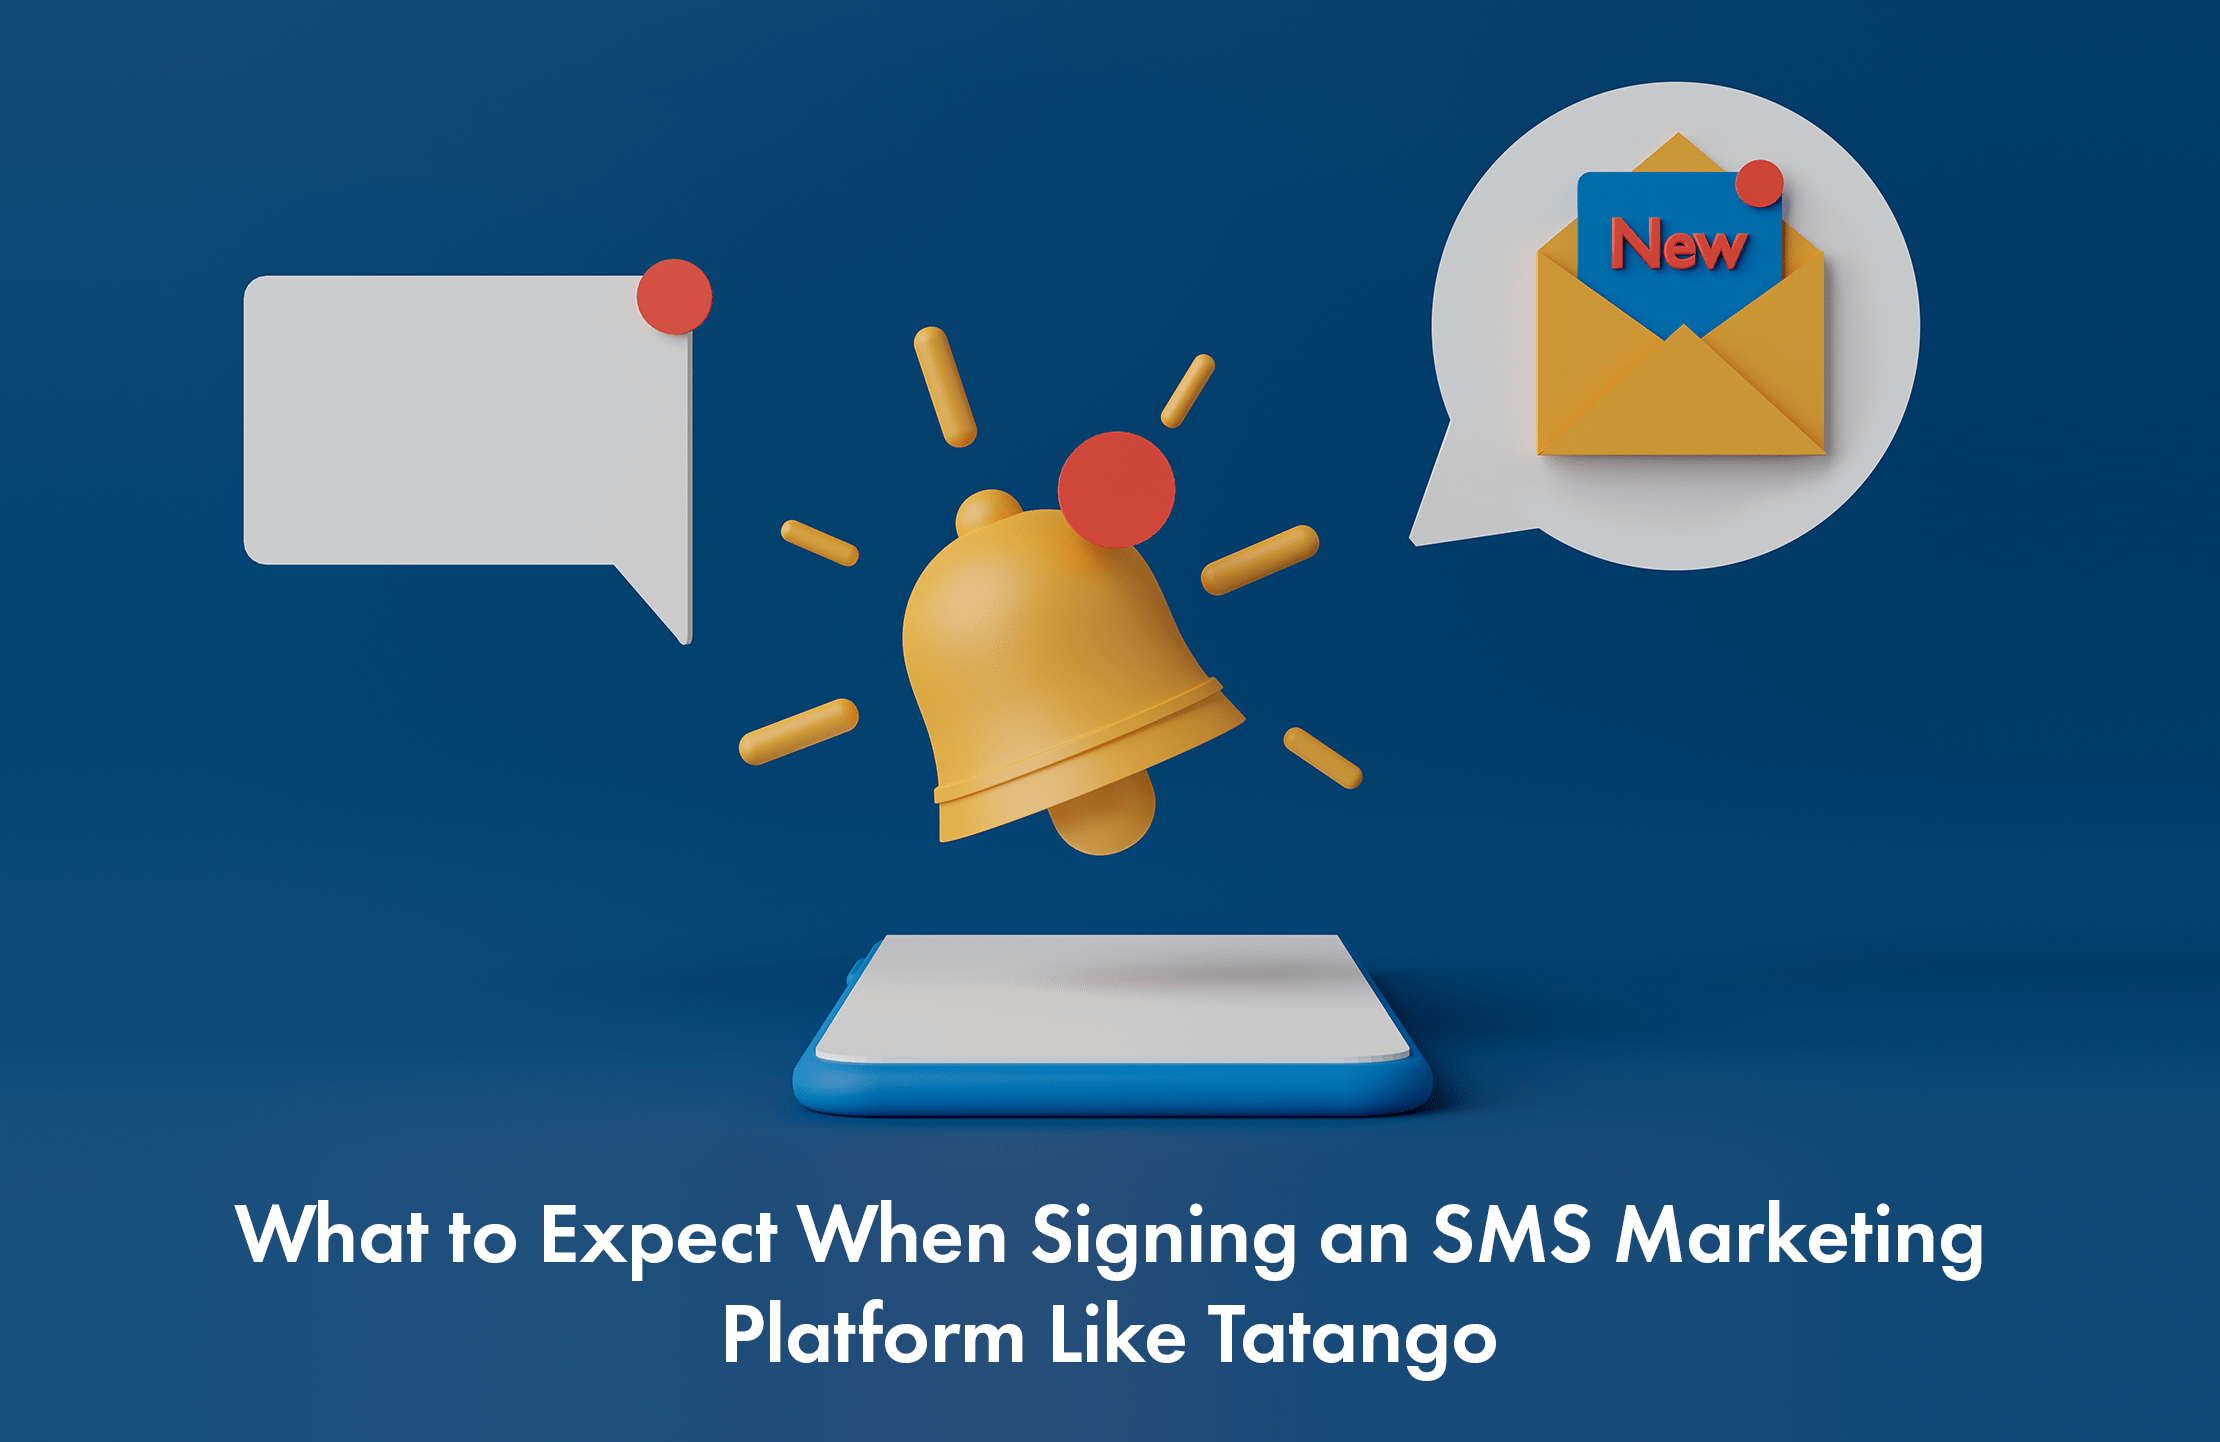 What to Expect When Signing an SMS Marketing Platform Like Tatango